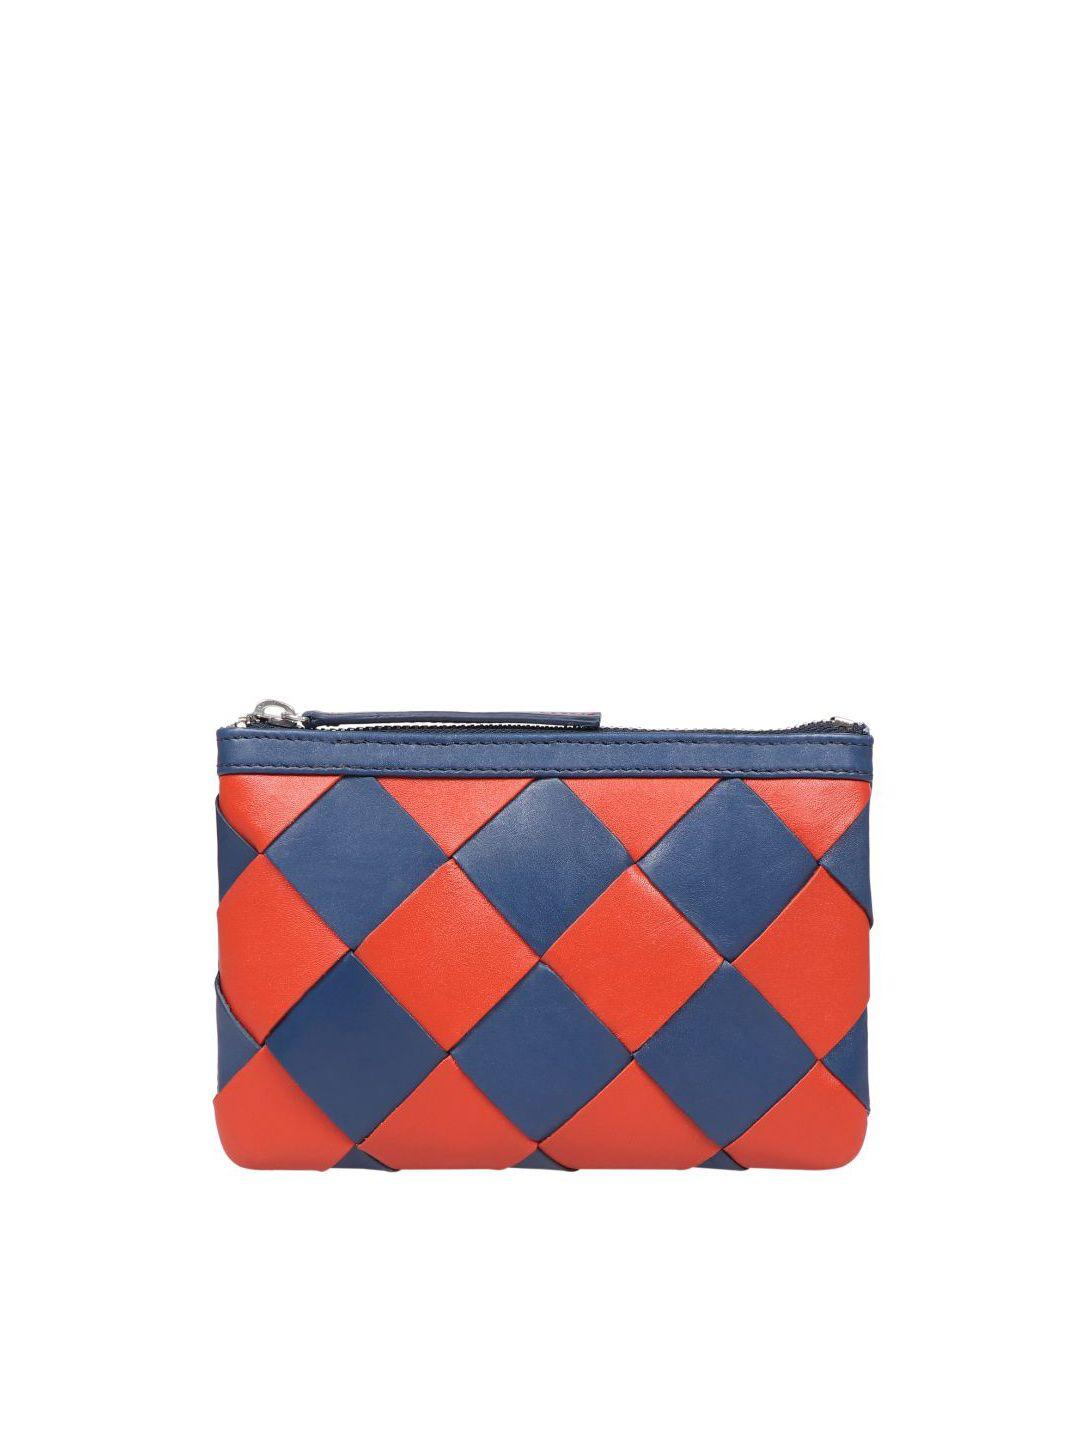 hidesign blue & red checked purse clutch